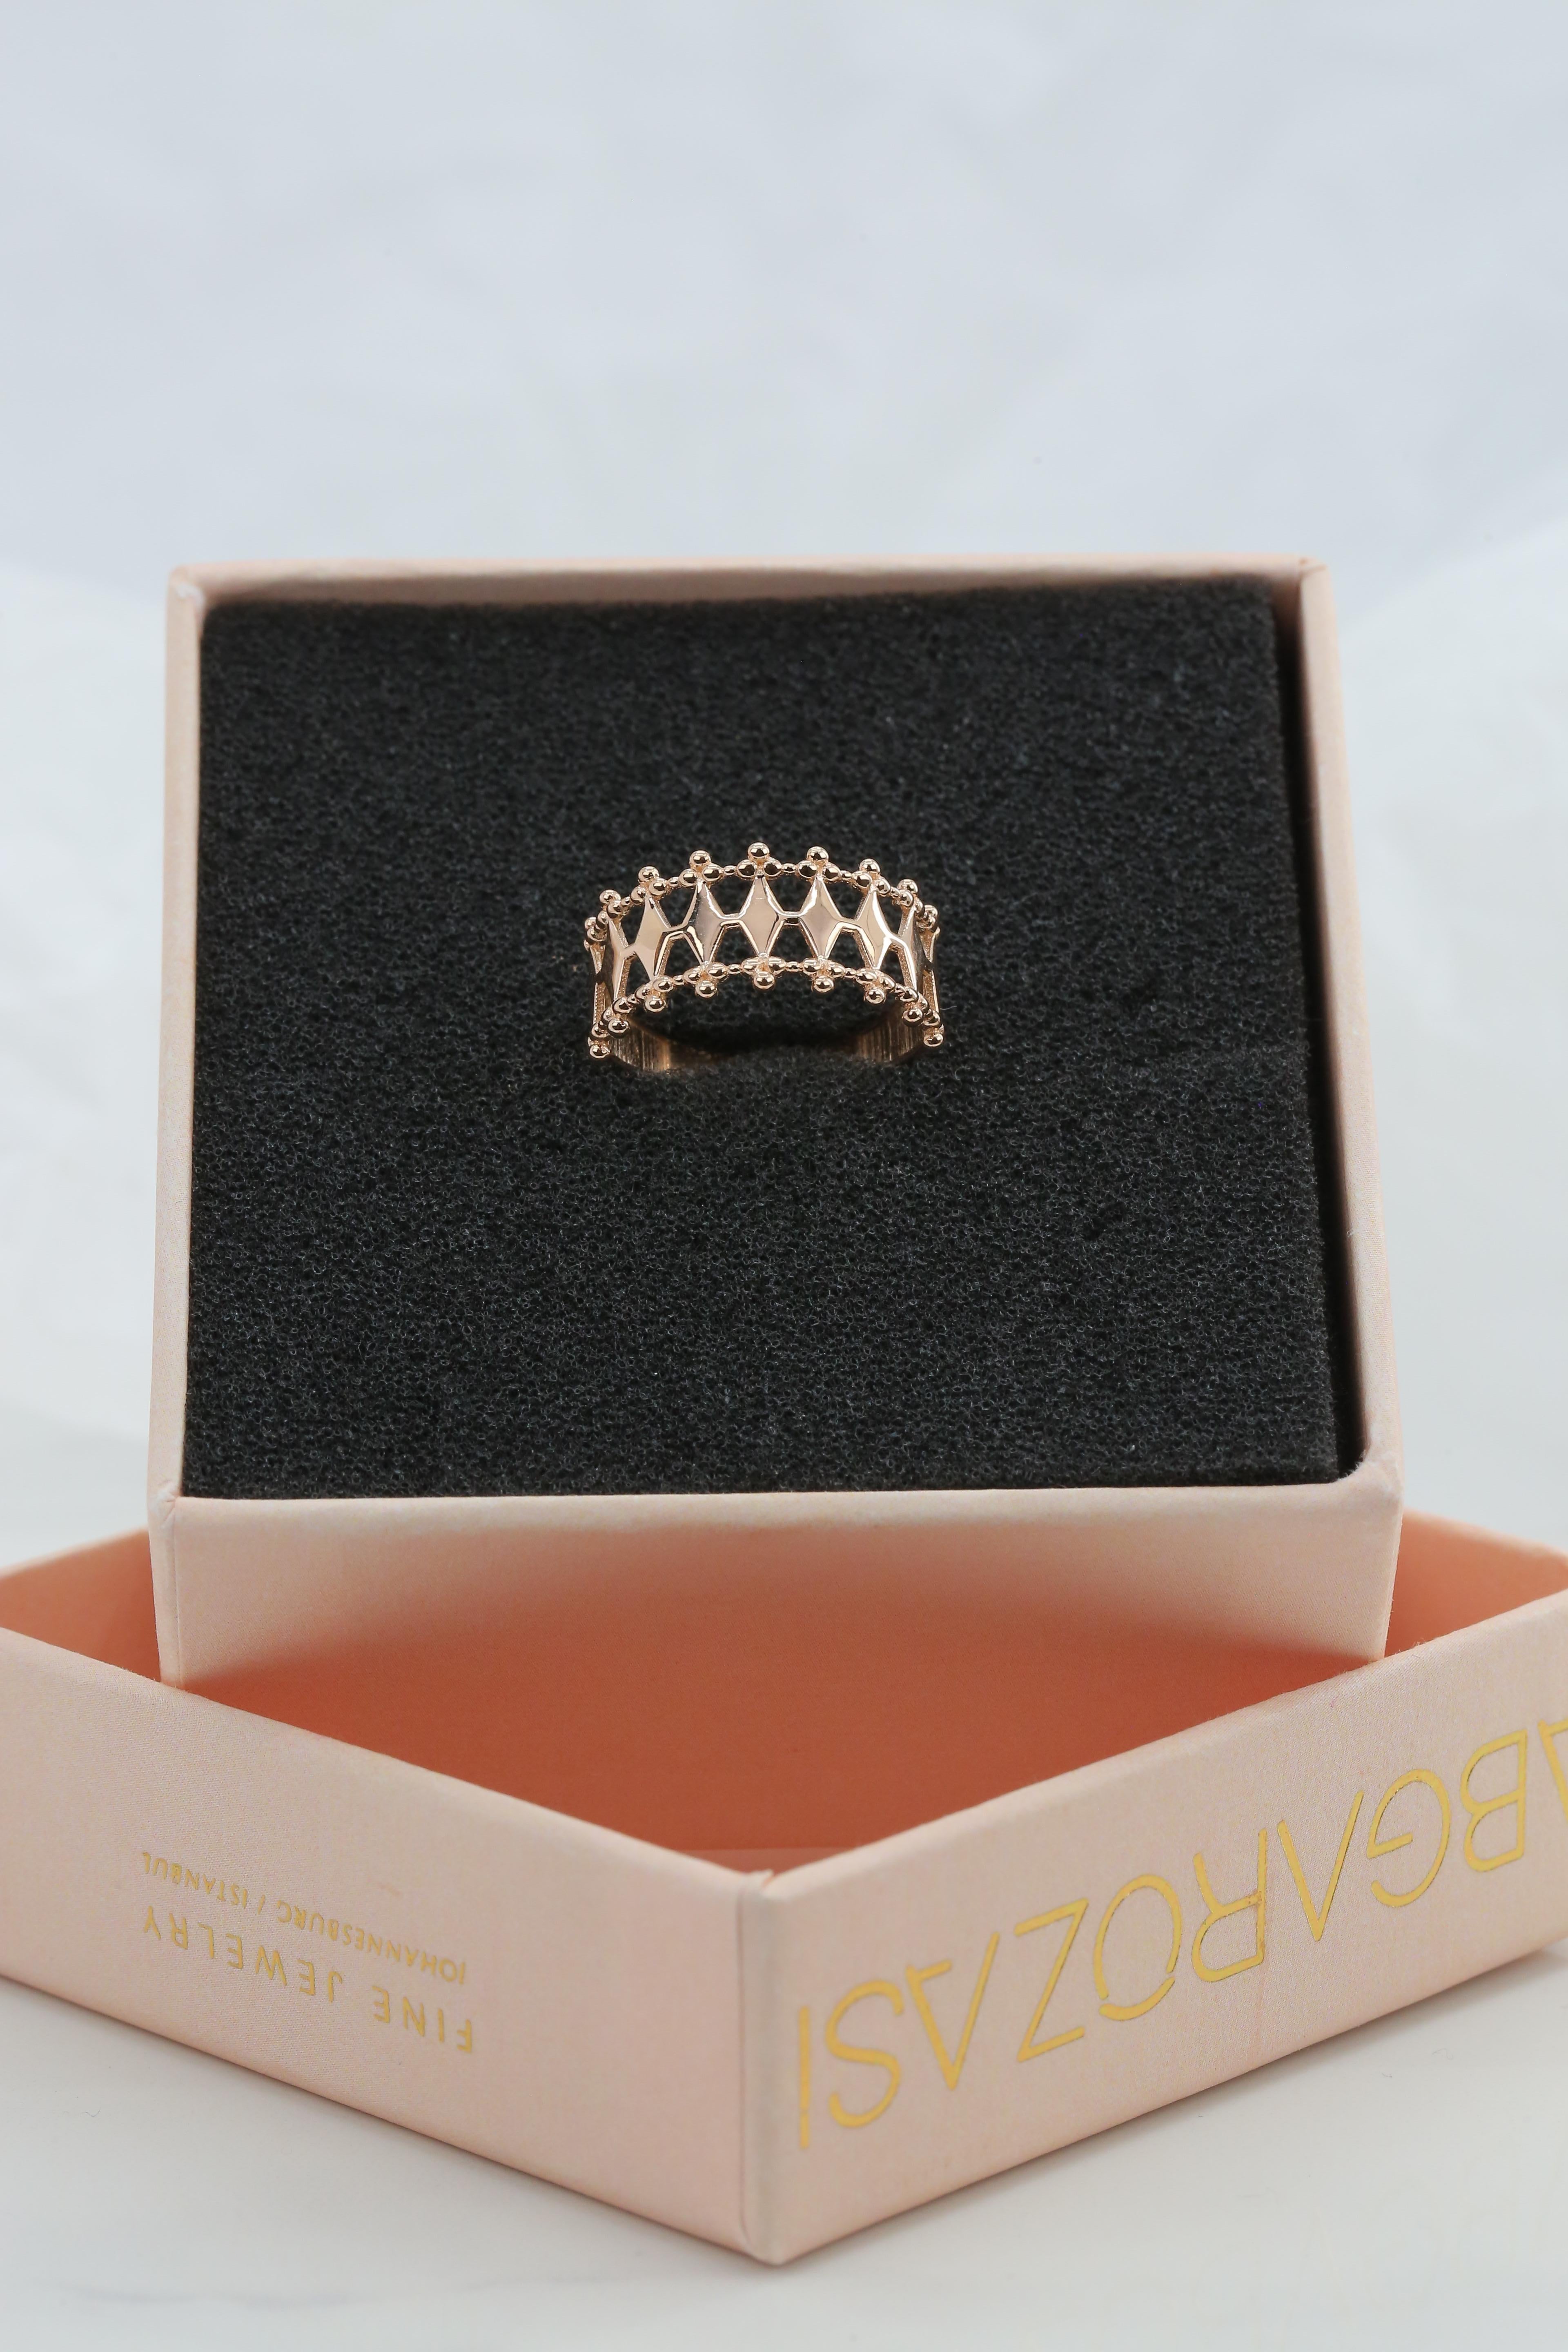 For Sale:  14k Gold Fence Ring, Dainty Fence Ring, 14k Gold Dainty Fence Shaped Ring, Fence 8